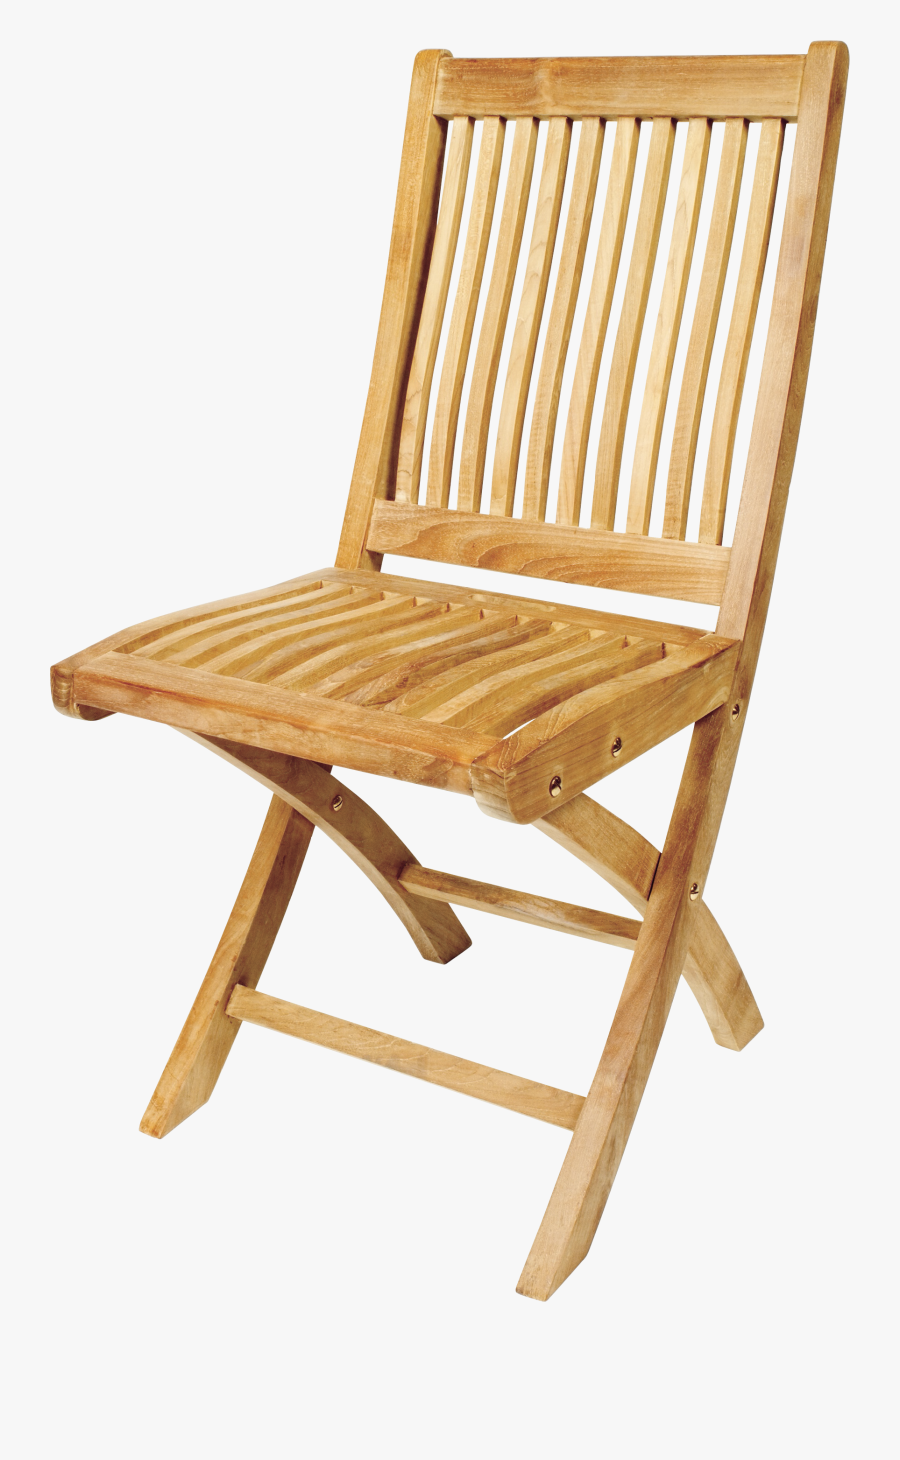 Wooden Folding Chair Png, Transparent Clipart